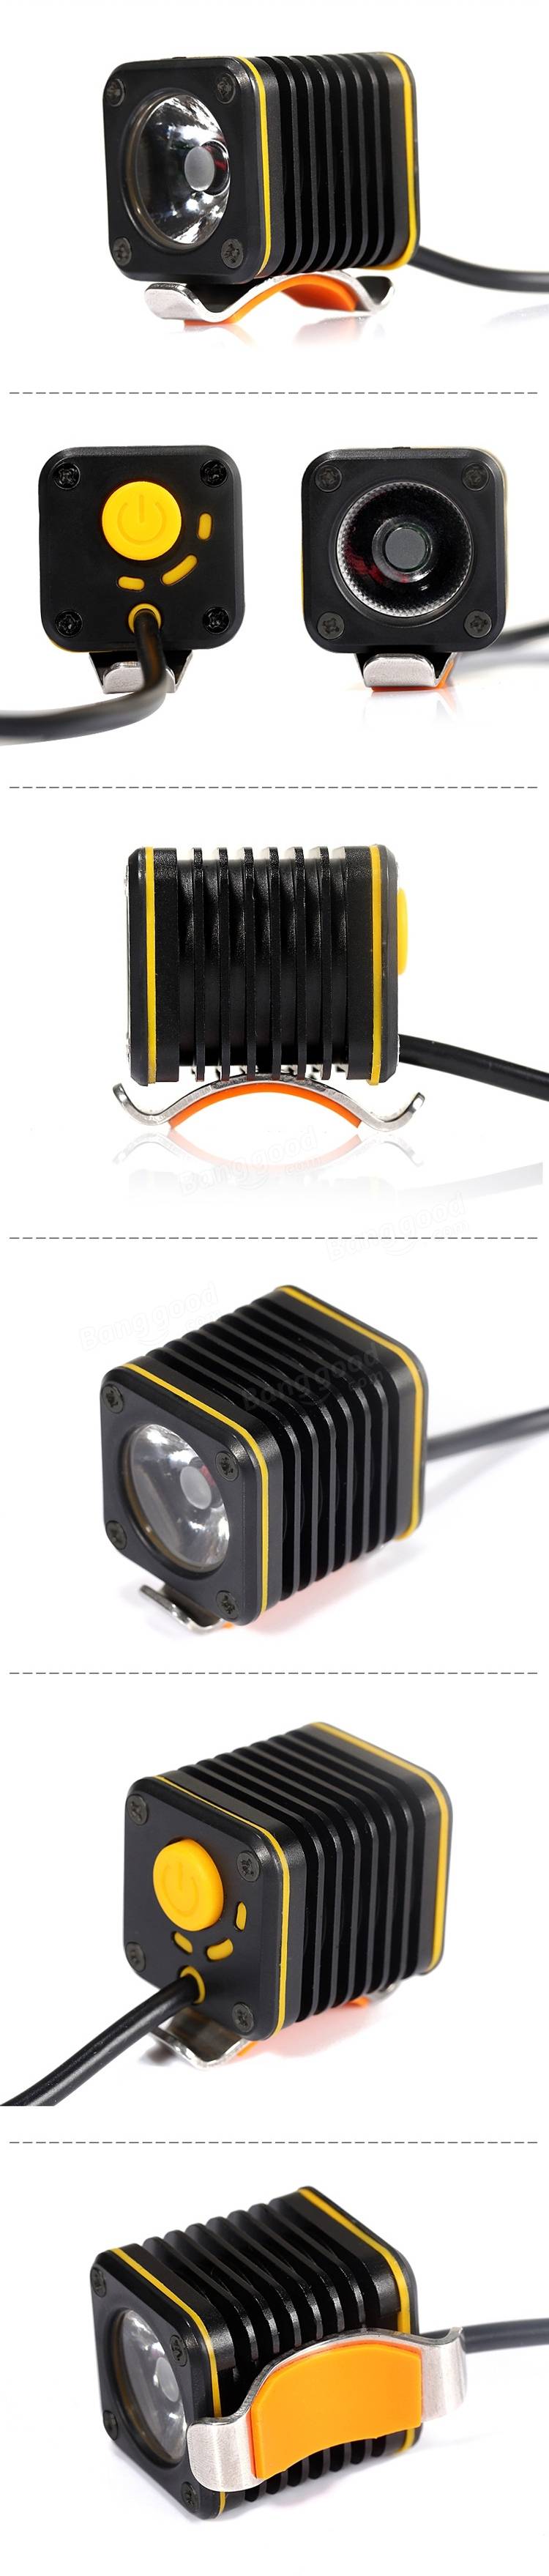 2Pcs-XANES-XL03-LED-Bicycle-Front-Light-Cycling-Warning-Light-Smart-Temperature-Regulated-Lamp-IPX6--1266433